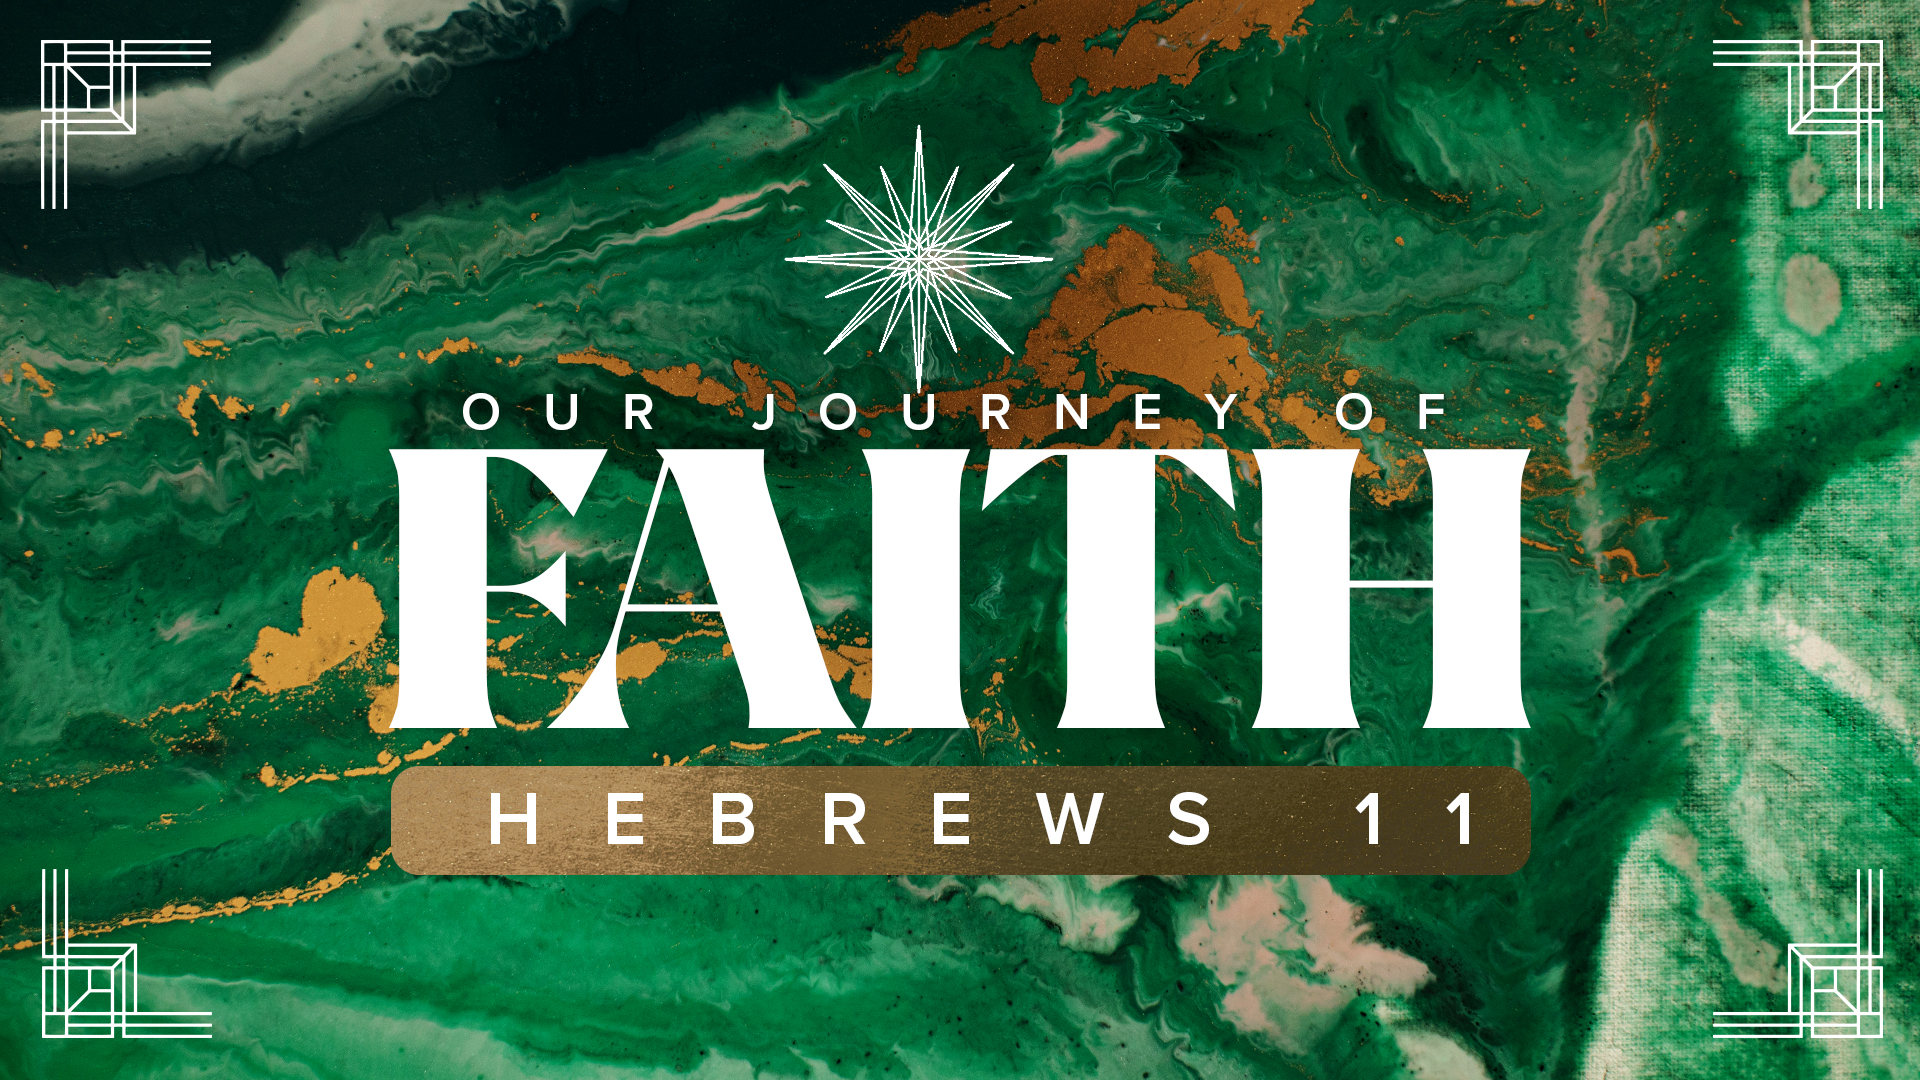 Hebrews 11:1-3 Where the Journey Starts (Hebrews 11: Our Journey of Faith) Image